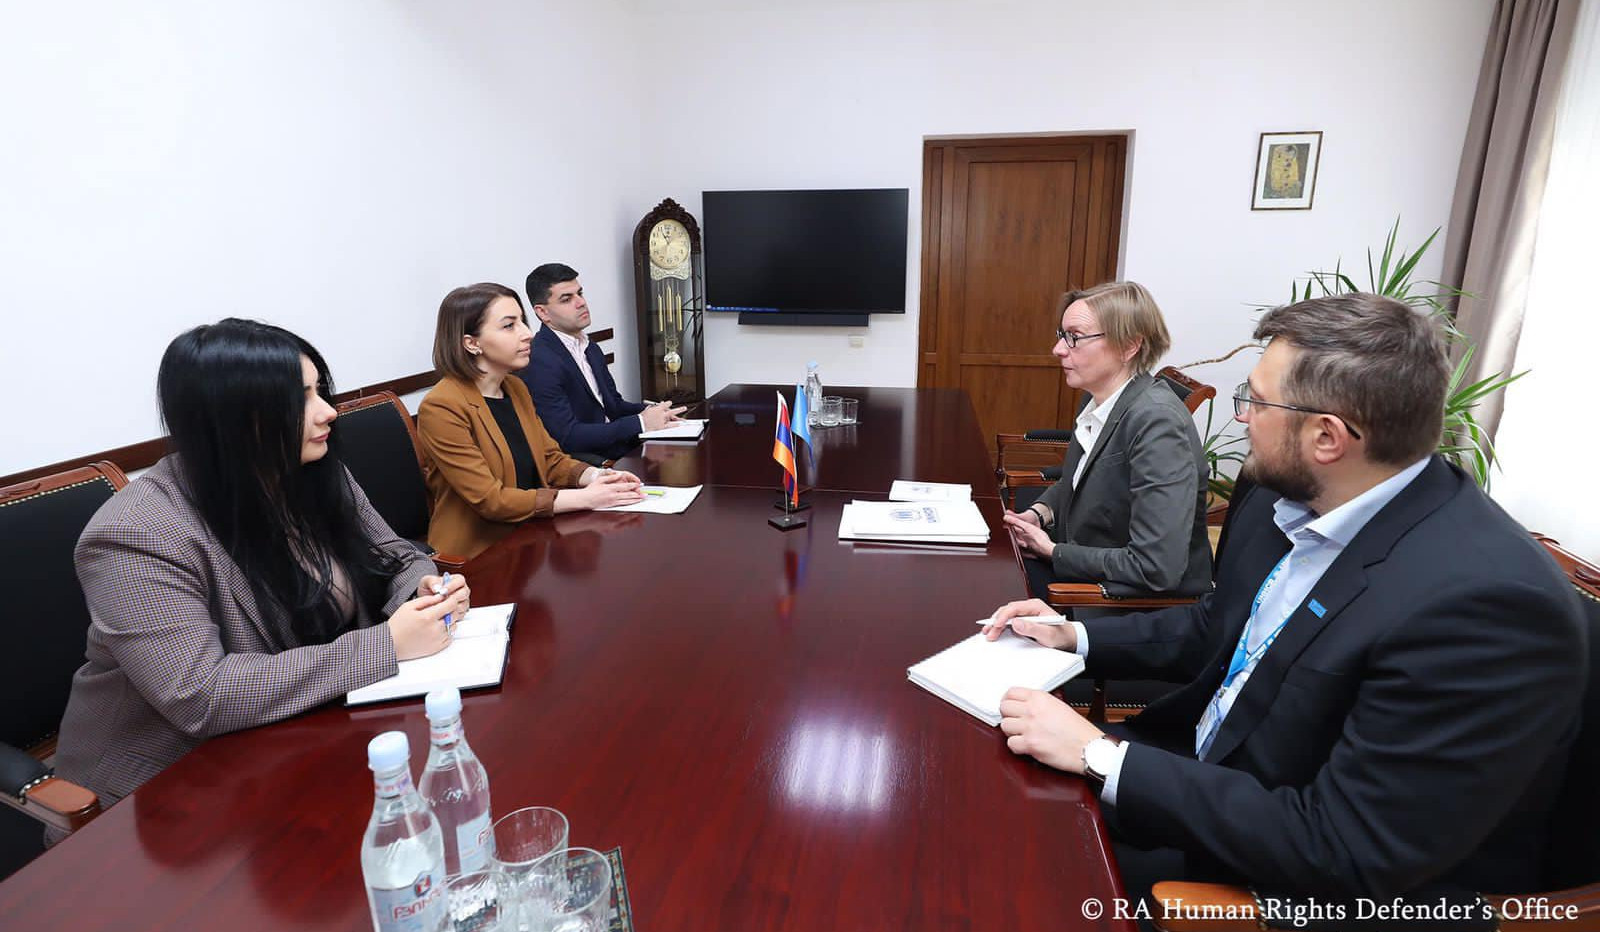 Human Rights Defender and representative of United Nations High Commissioner for Refugees in Armenia discussed areas of cooperation